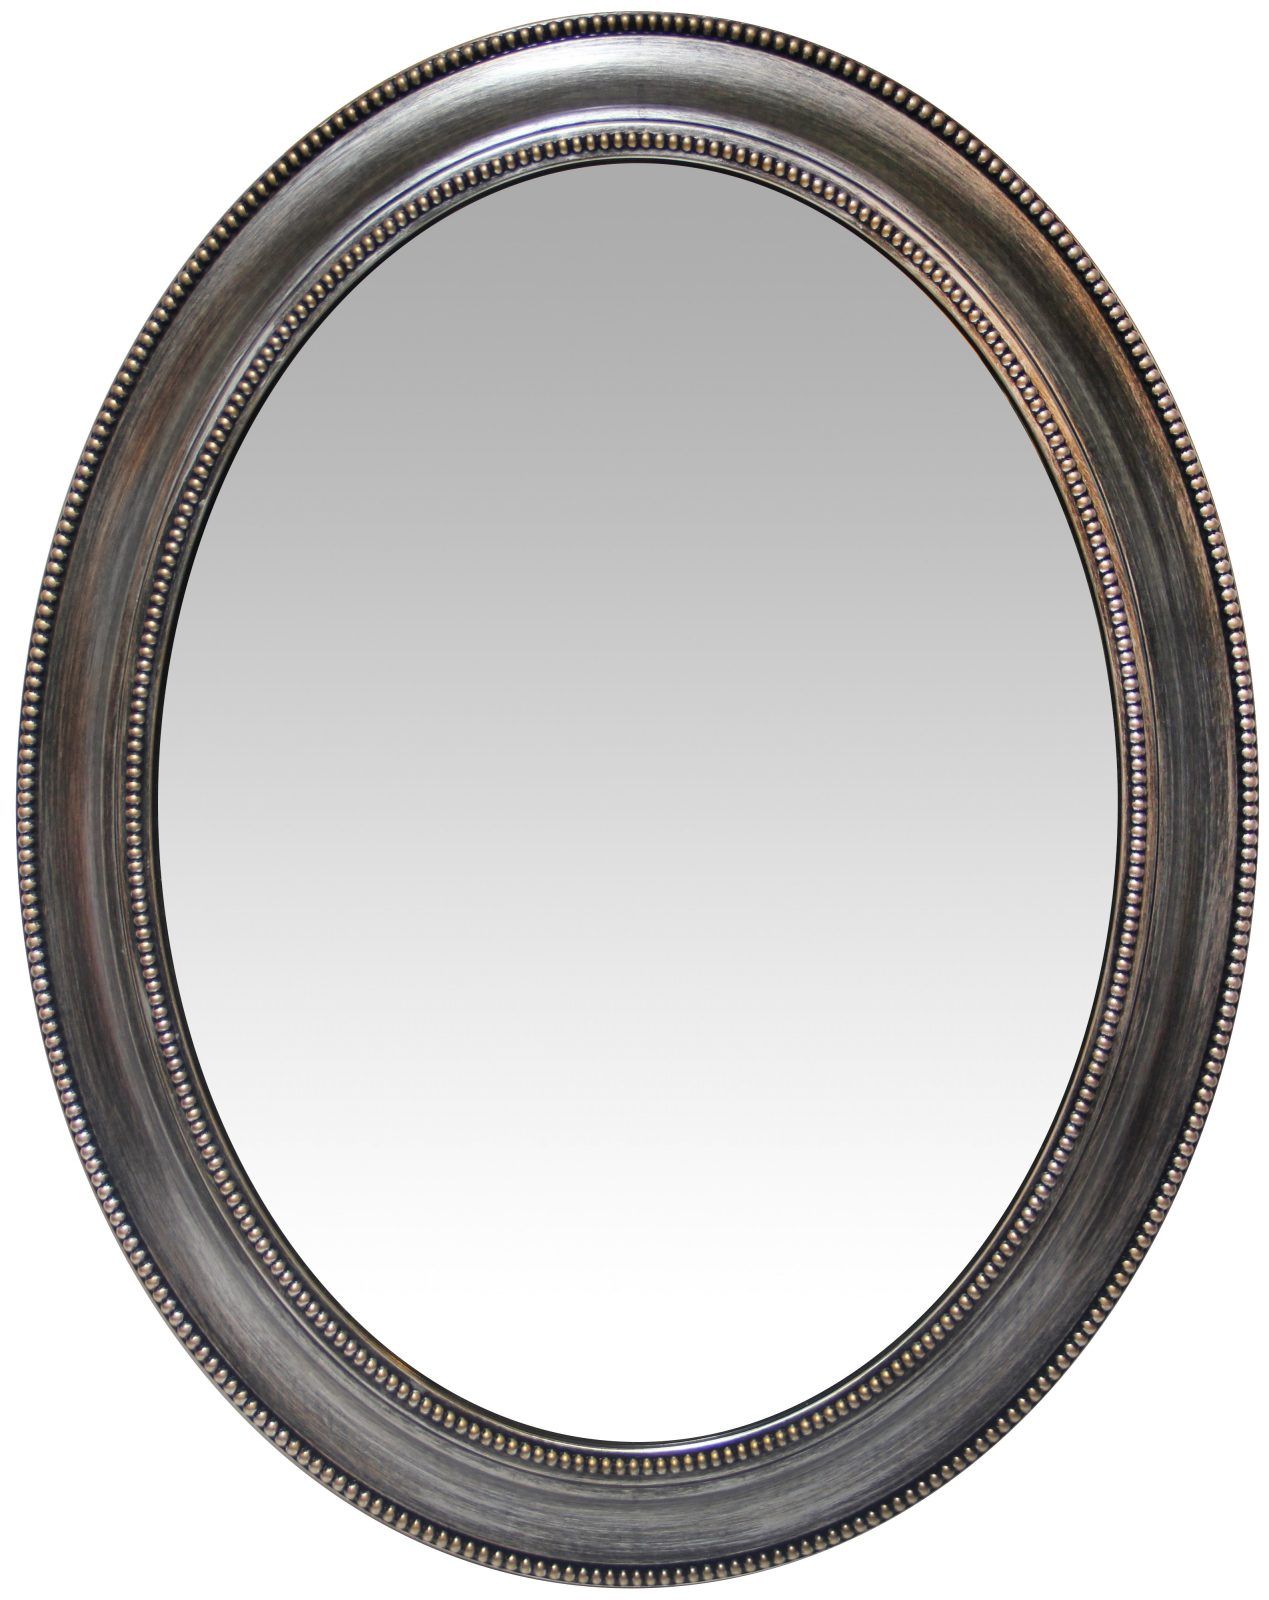 30 Inch Sonore Antique Silver Oval Wall Mirror| Clockroom Pertaining To Silver Beaded Square Wall Mirrors (View 1 of 15)